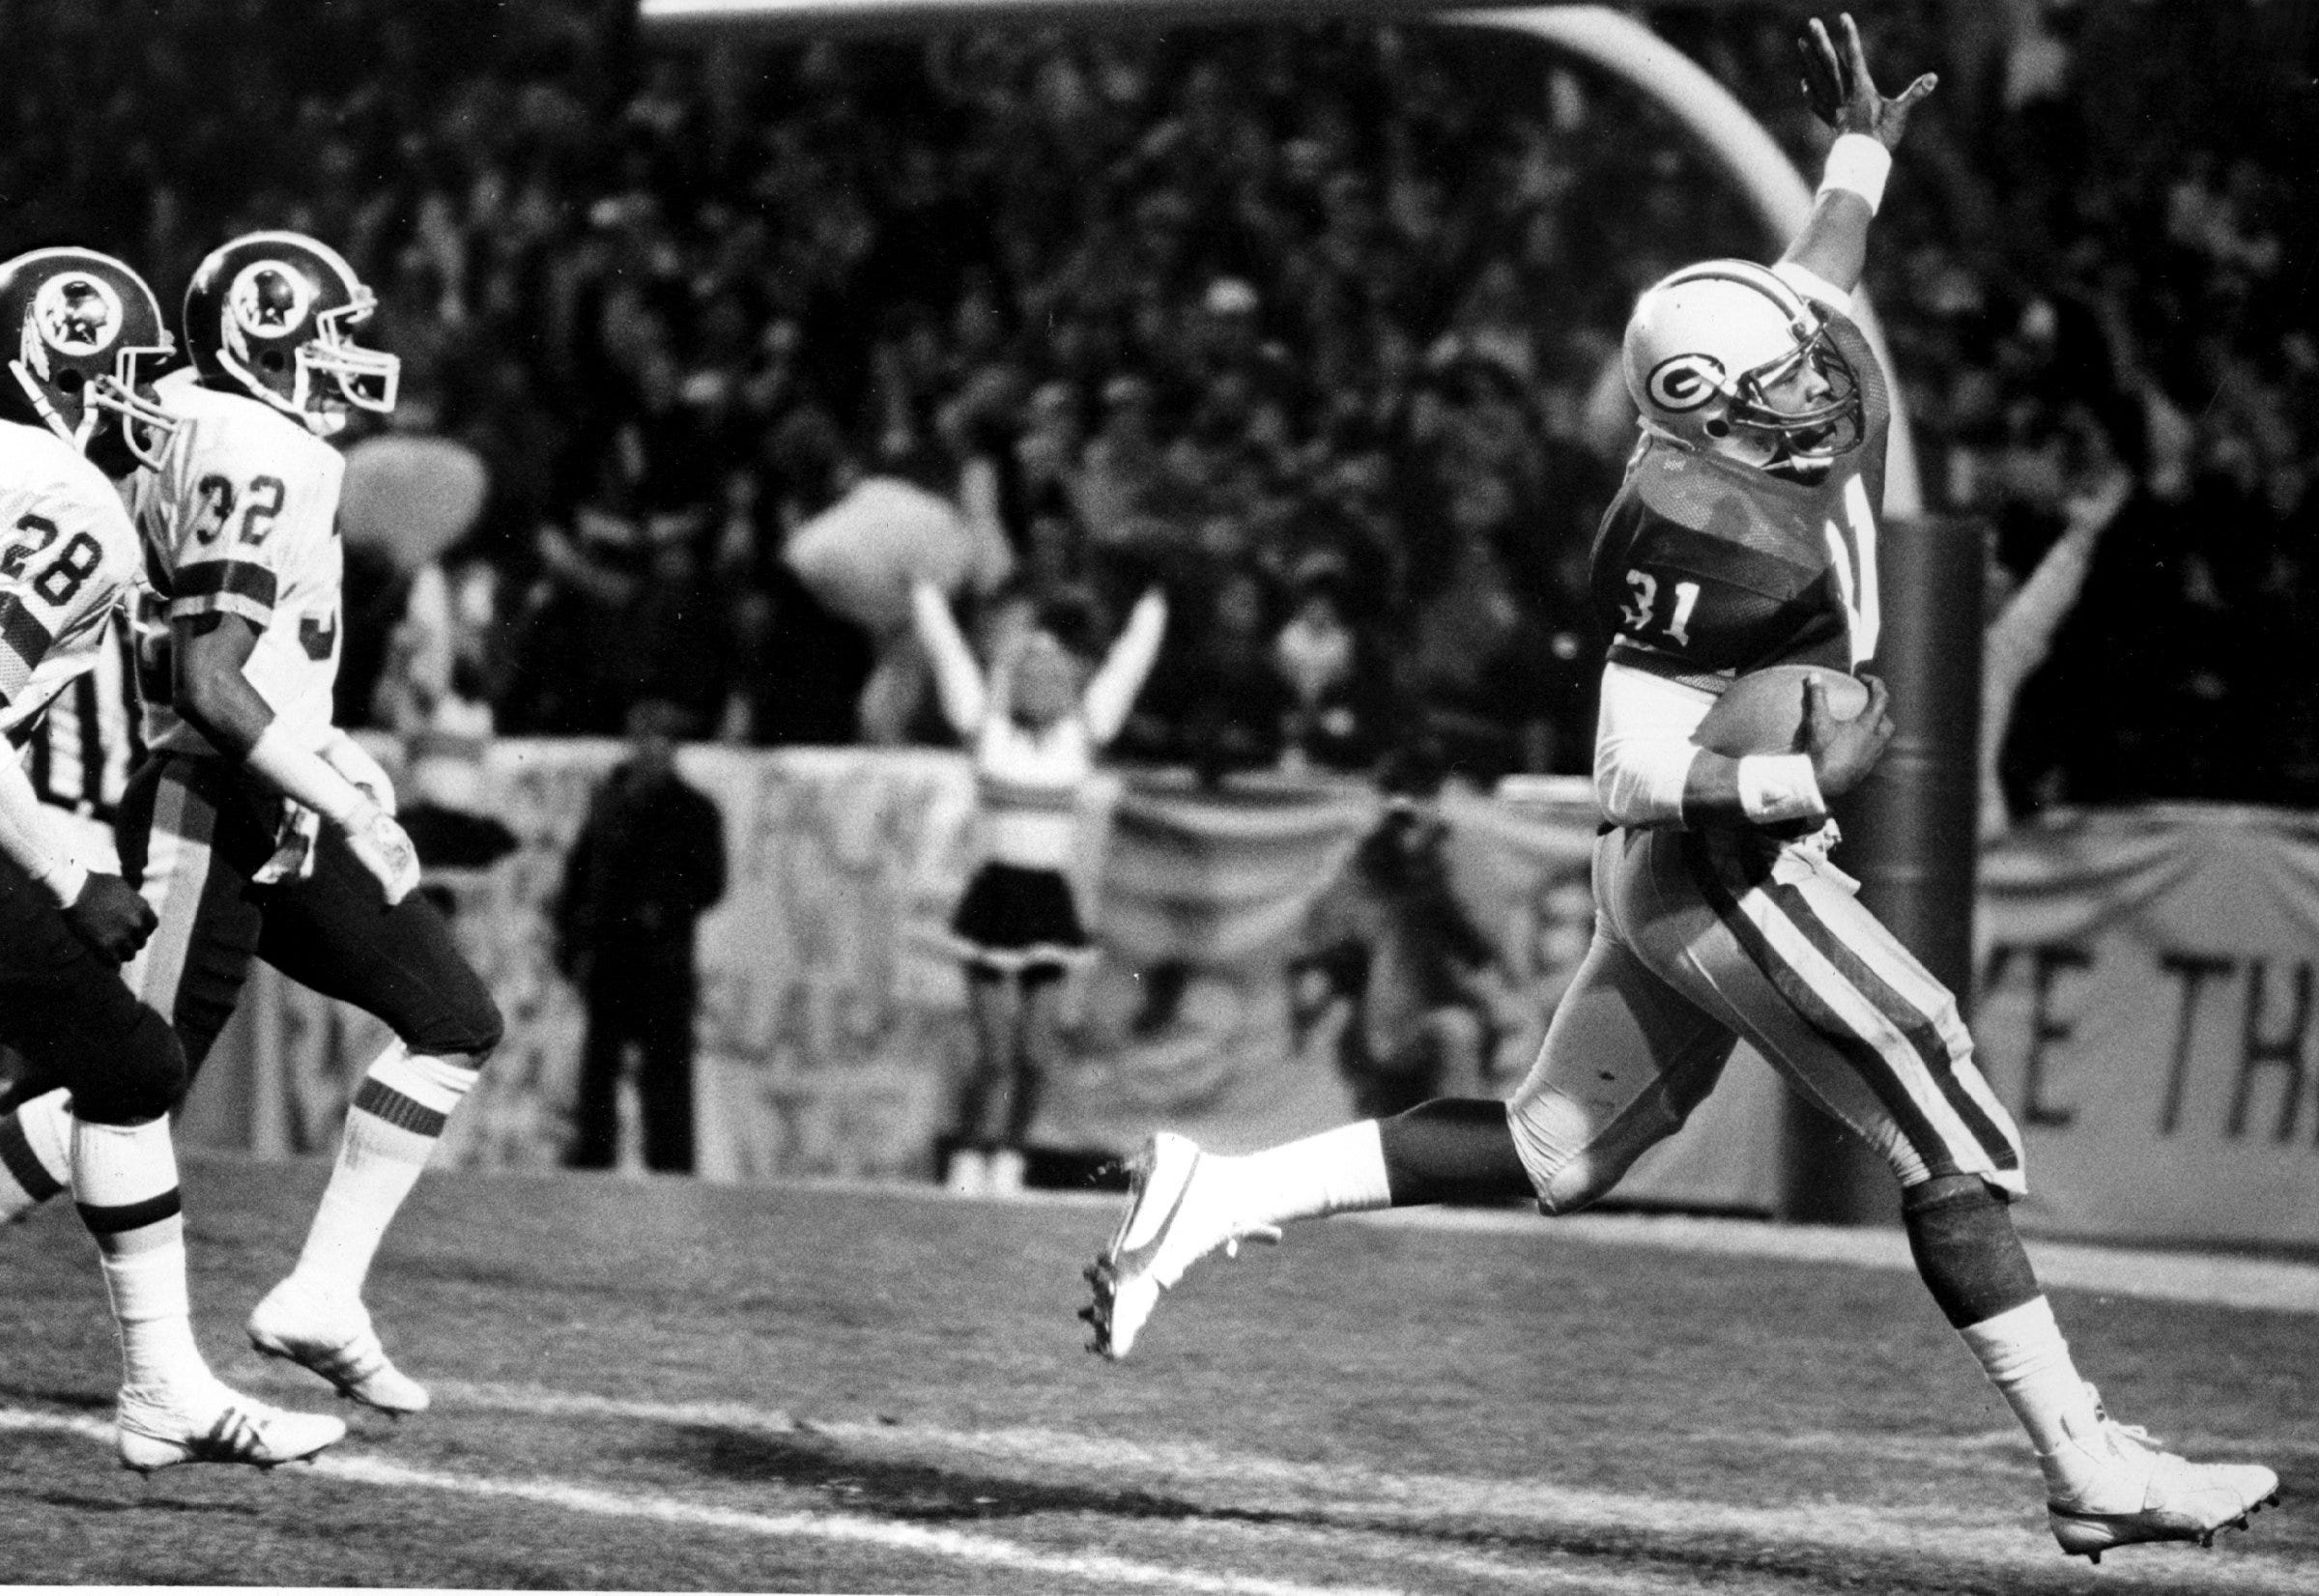 Gerry Ellis (31) scores a touchdown against the Washington Redskins on Oct. 17, 1983. The Green Bay Packers won the game 48-47.